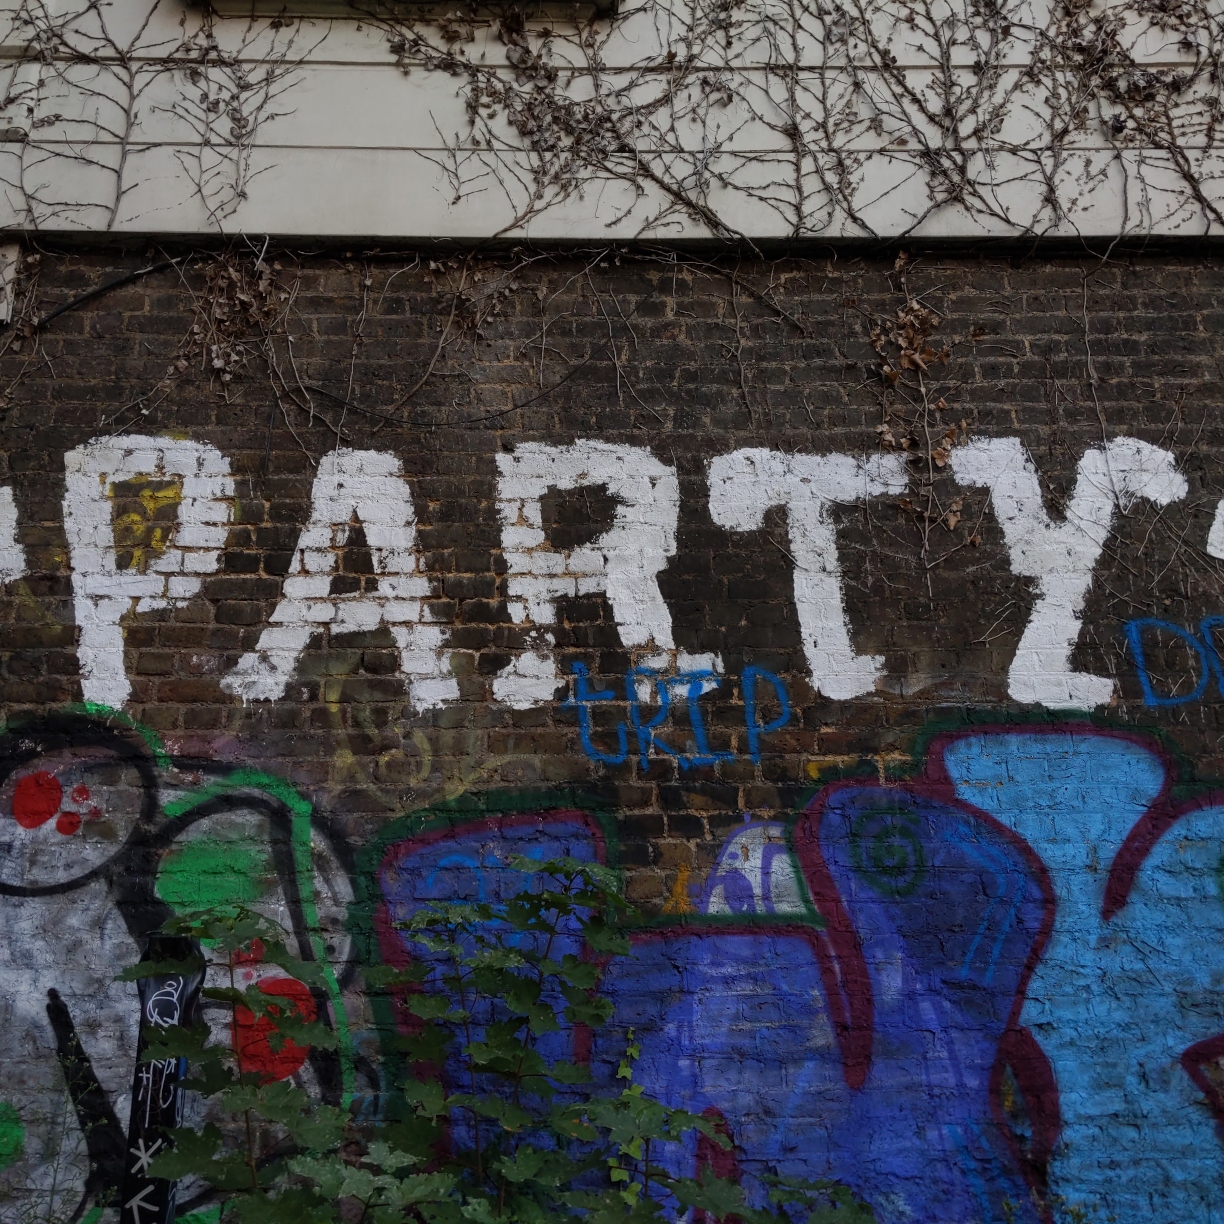 Graffiti on a brick wall surrounded by other tags. It just says "Party" in large white letters